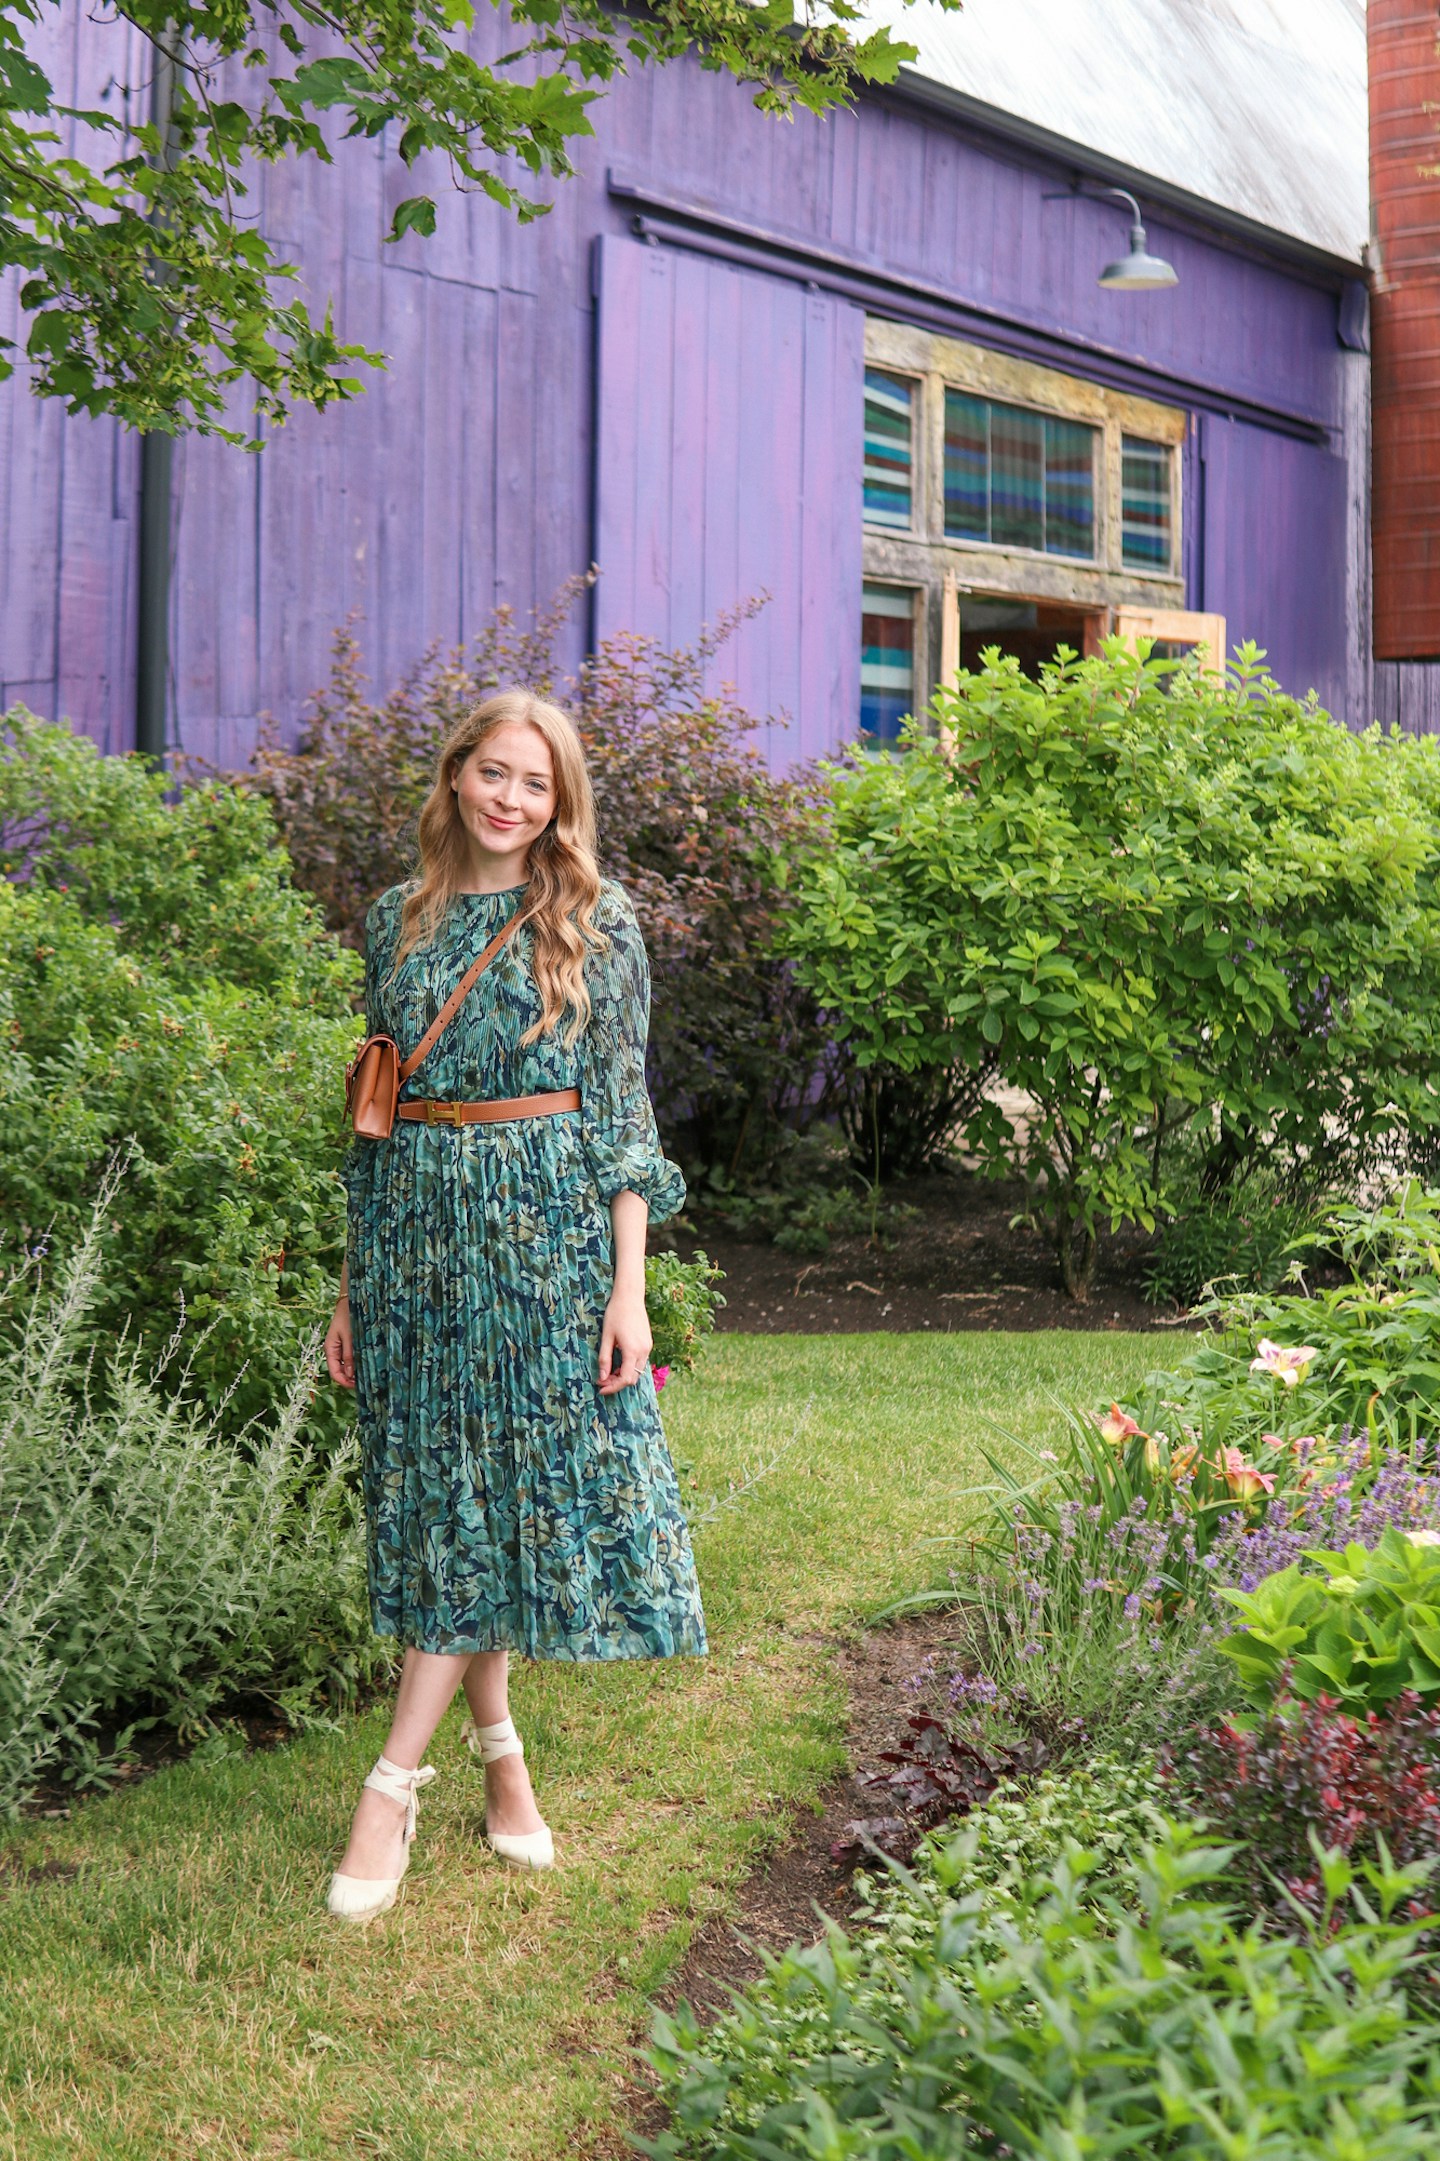 Closson Chasse is a beautiful Prince Edward County Winery, but it also produces beautiful wines too! I'm wearing an Aritzia Wilfred Riviera Dress, Castaner espadrilles and an Hermes Constance Belt.